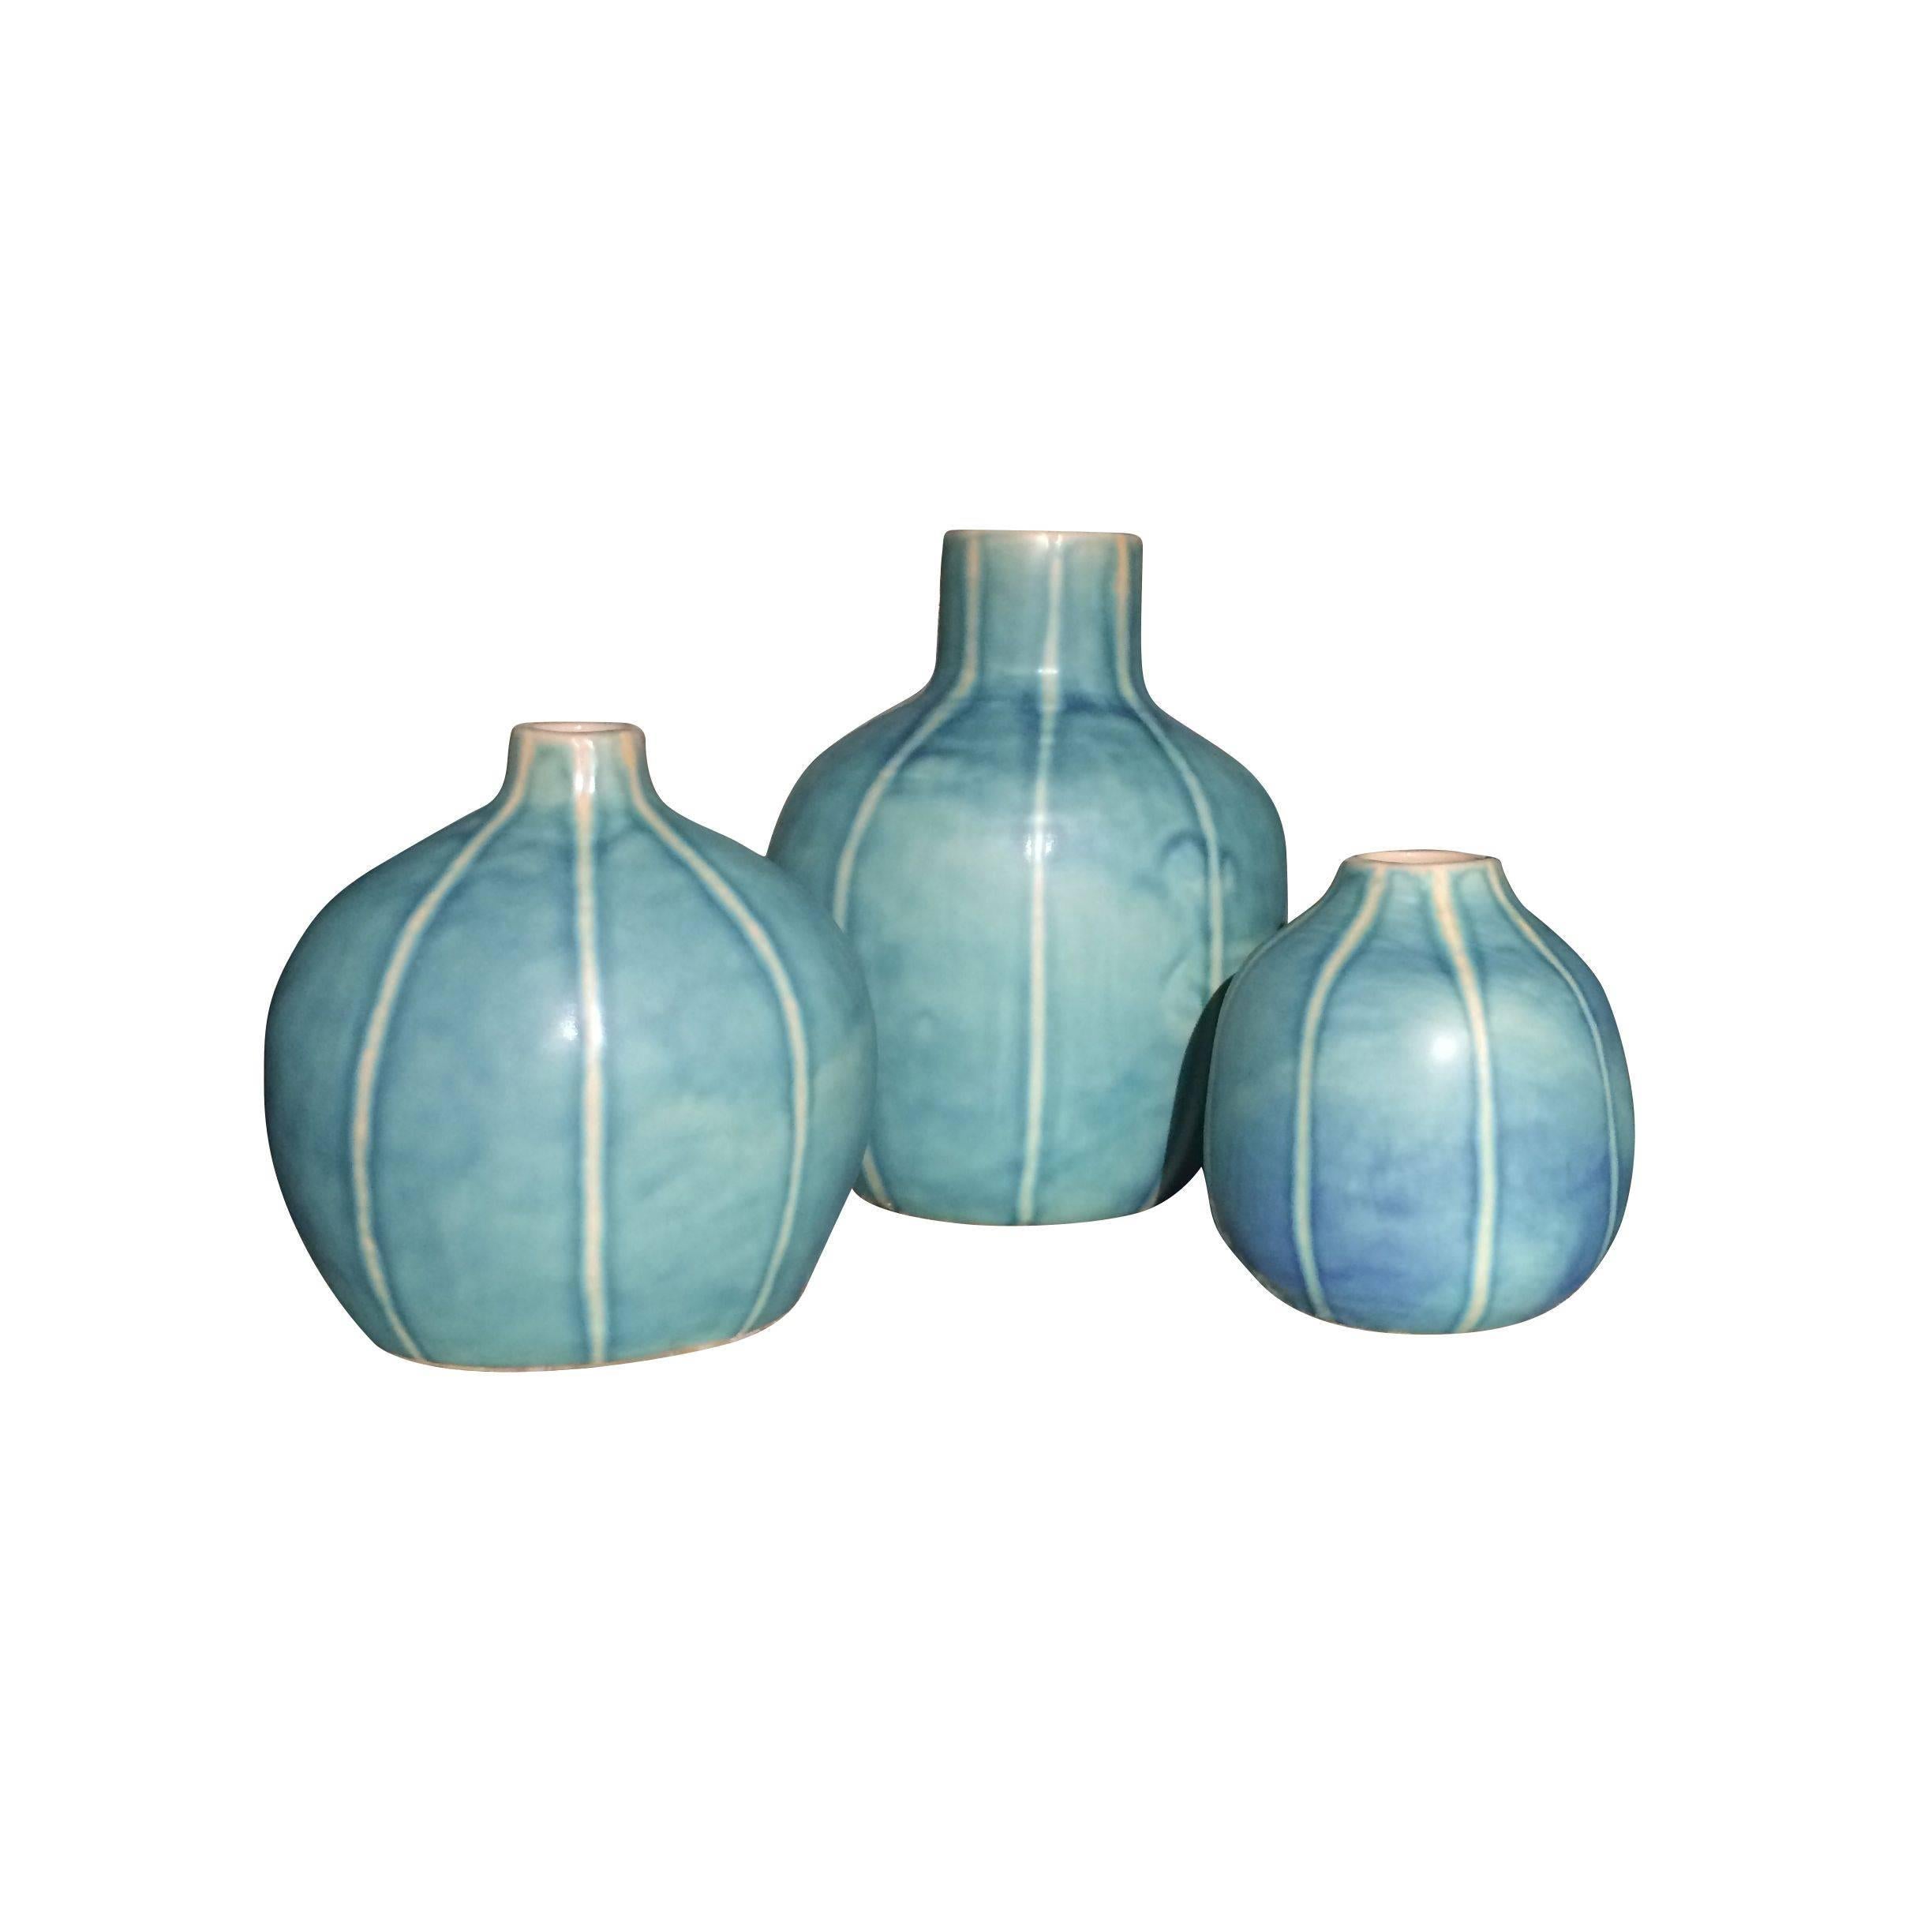 Contemporary medium sized melon shaped washed turquoise glazed stoneware vase.
Sits well with S4646 and S4647.
See image #2.
  